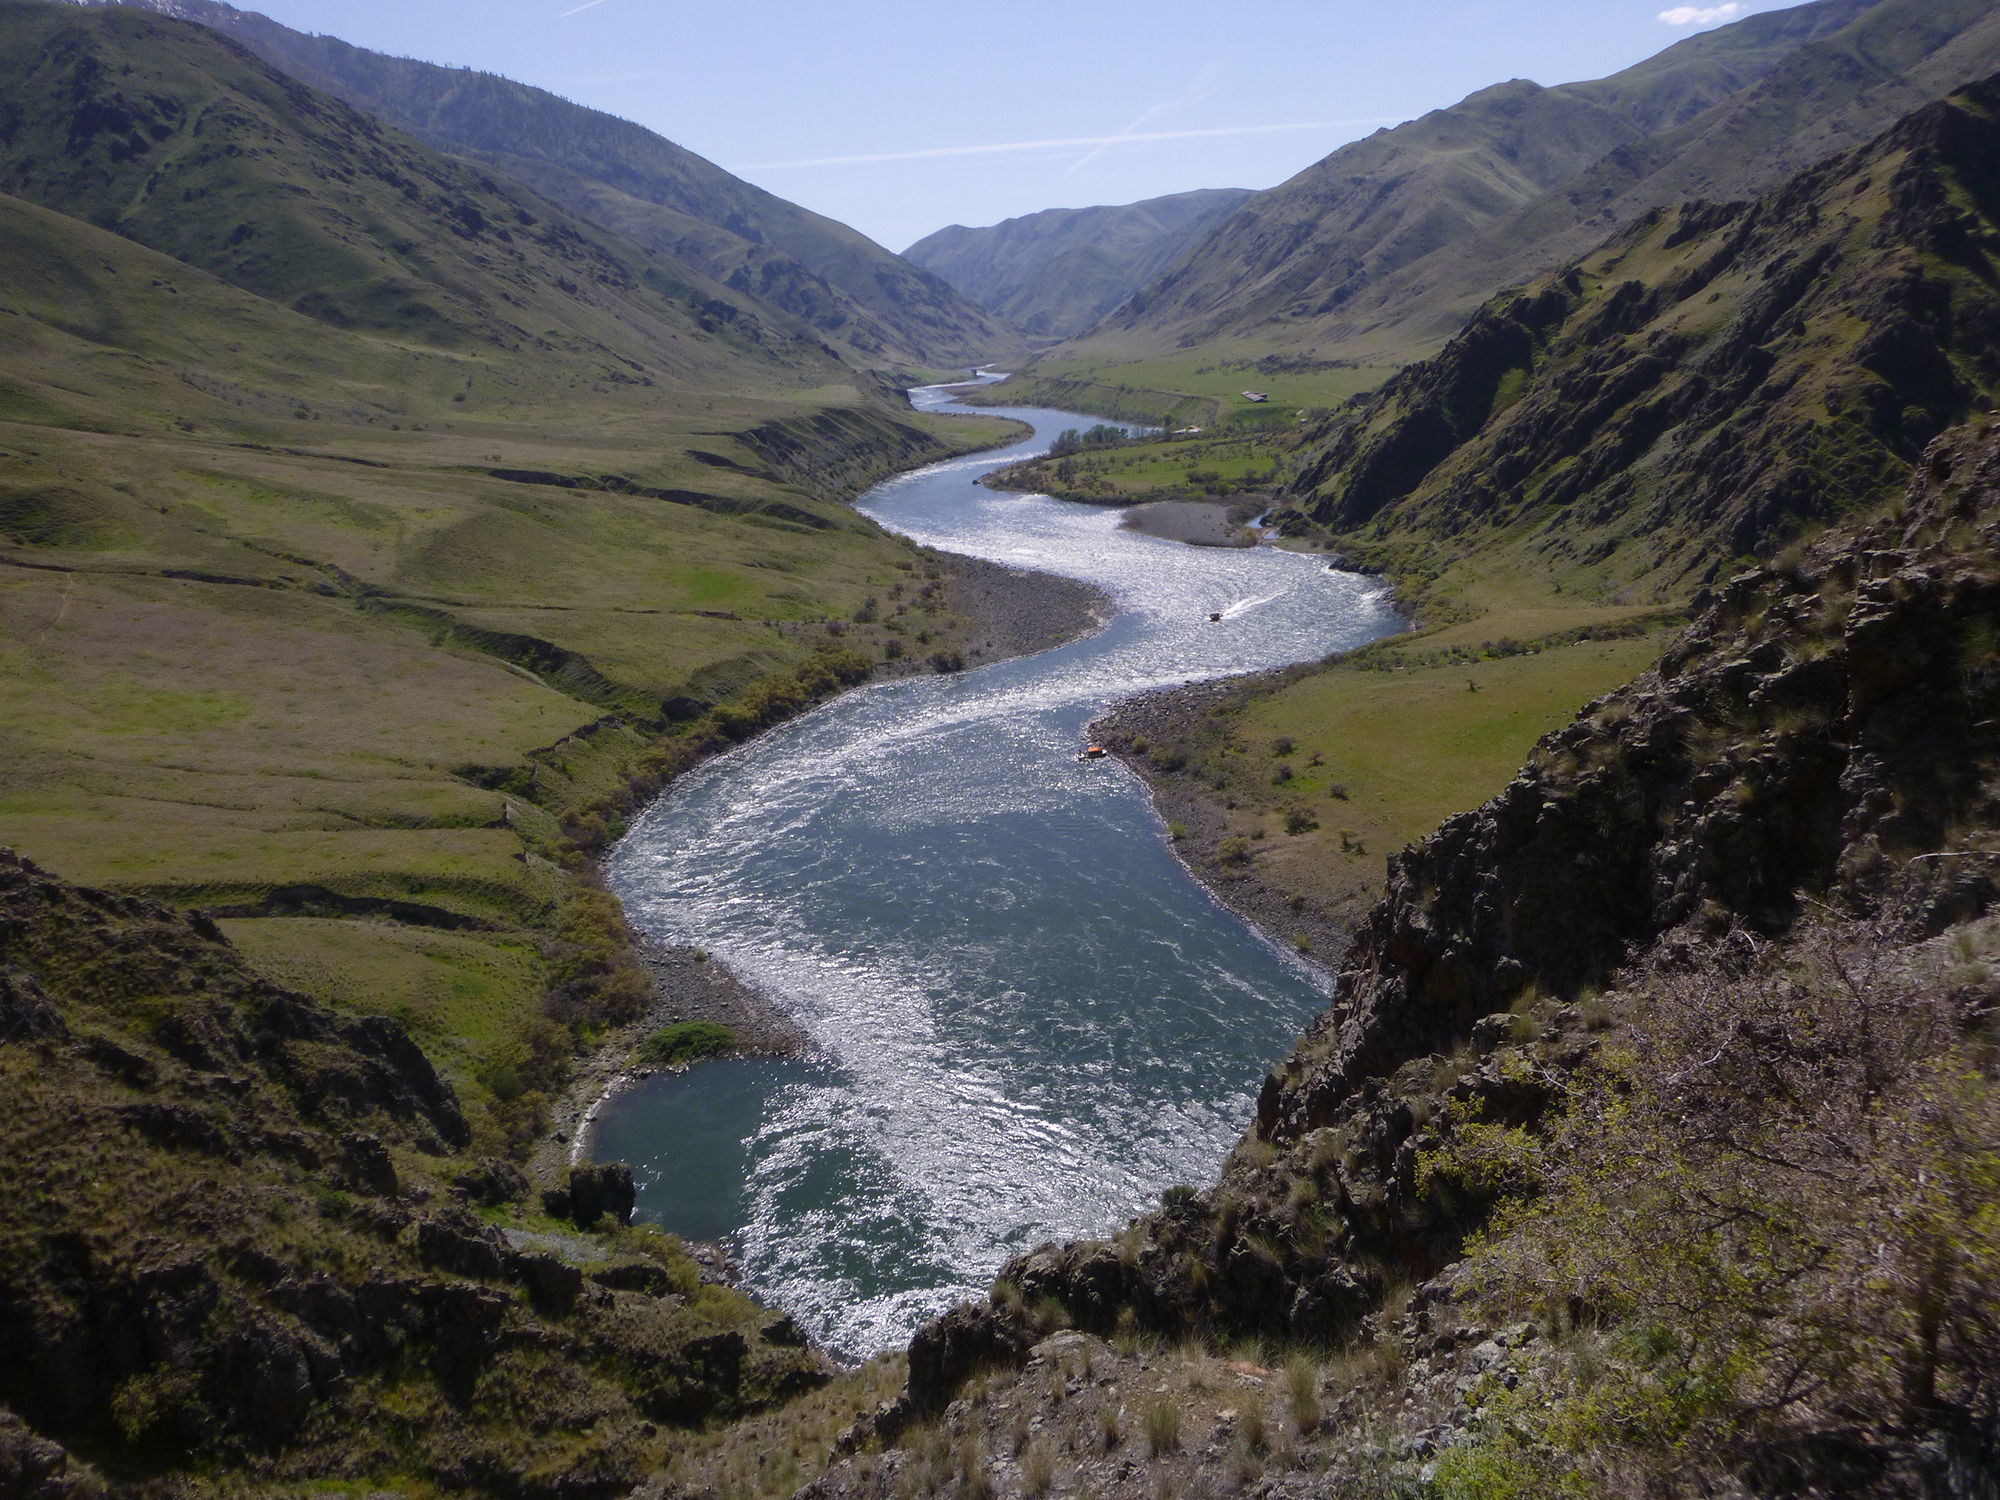 Jet boats run the river into Hells Canyon as seen from Snake River Trail 102 near Suicide Point.